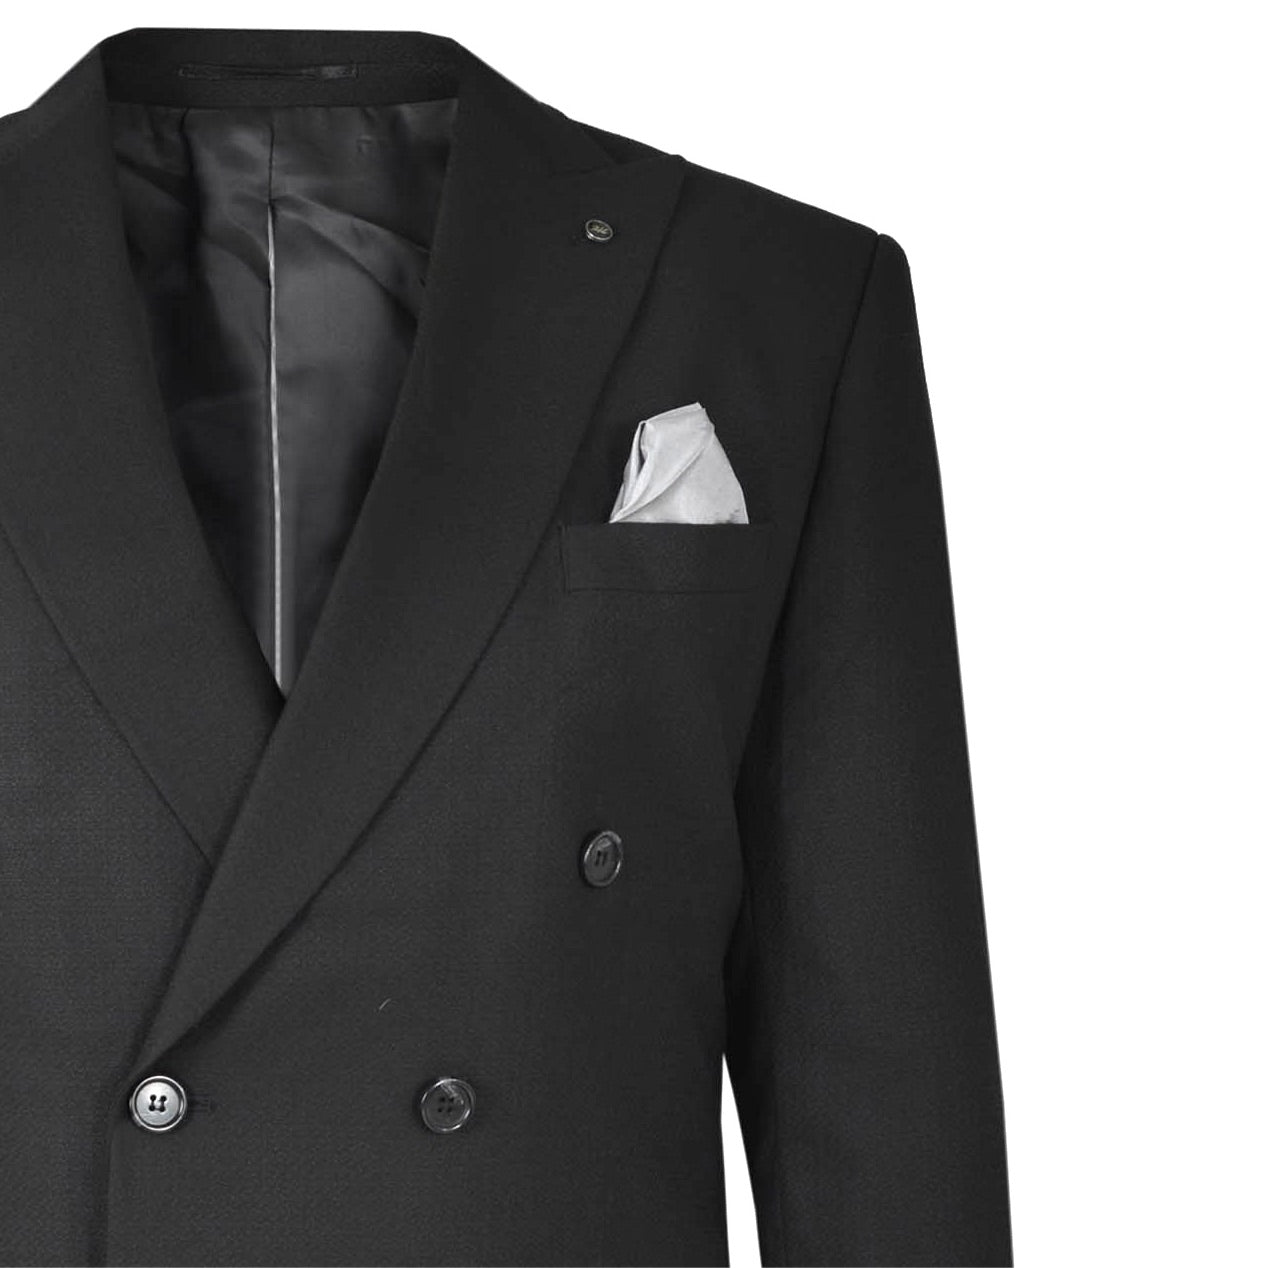 2H Black Peaked Lapel Double breasted Suit